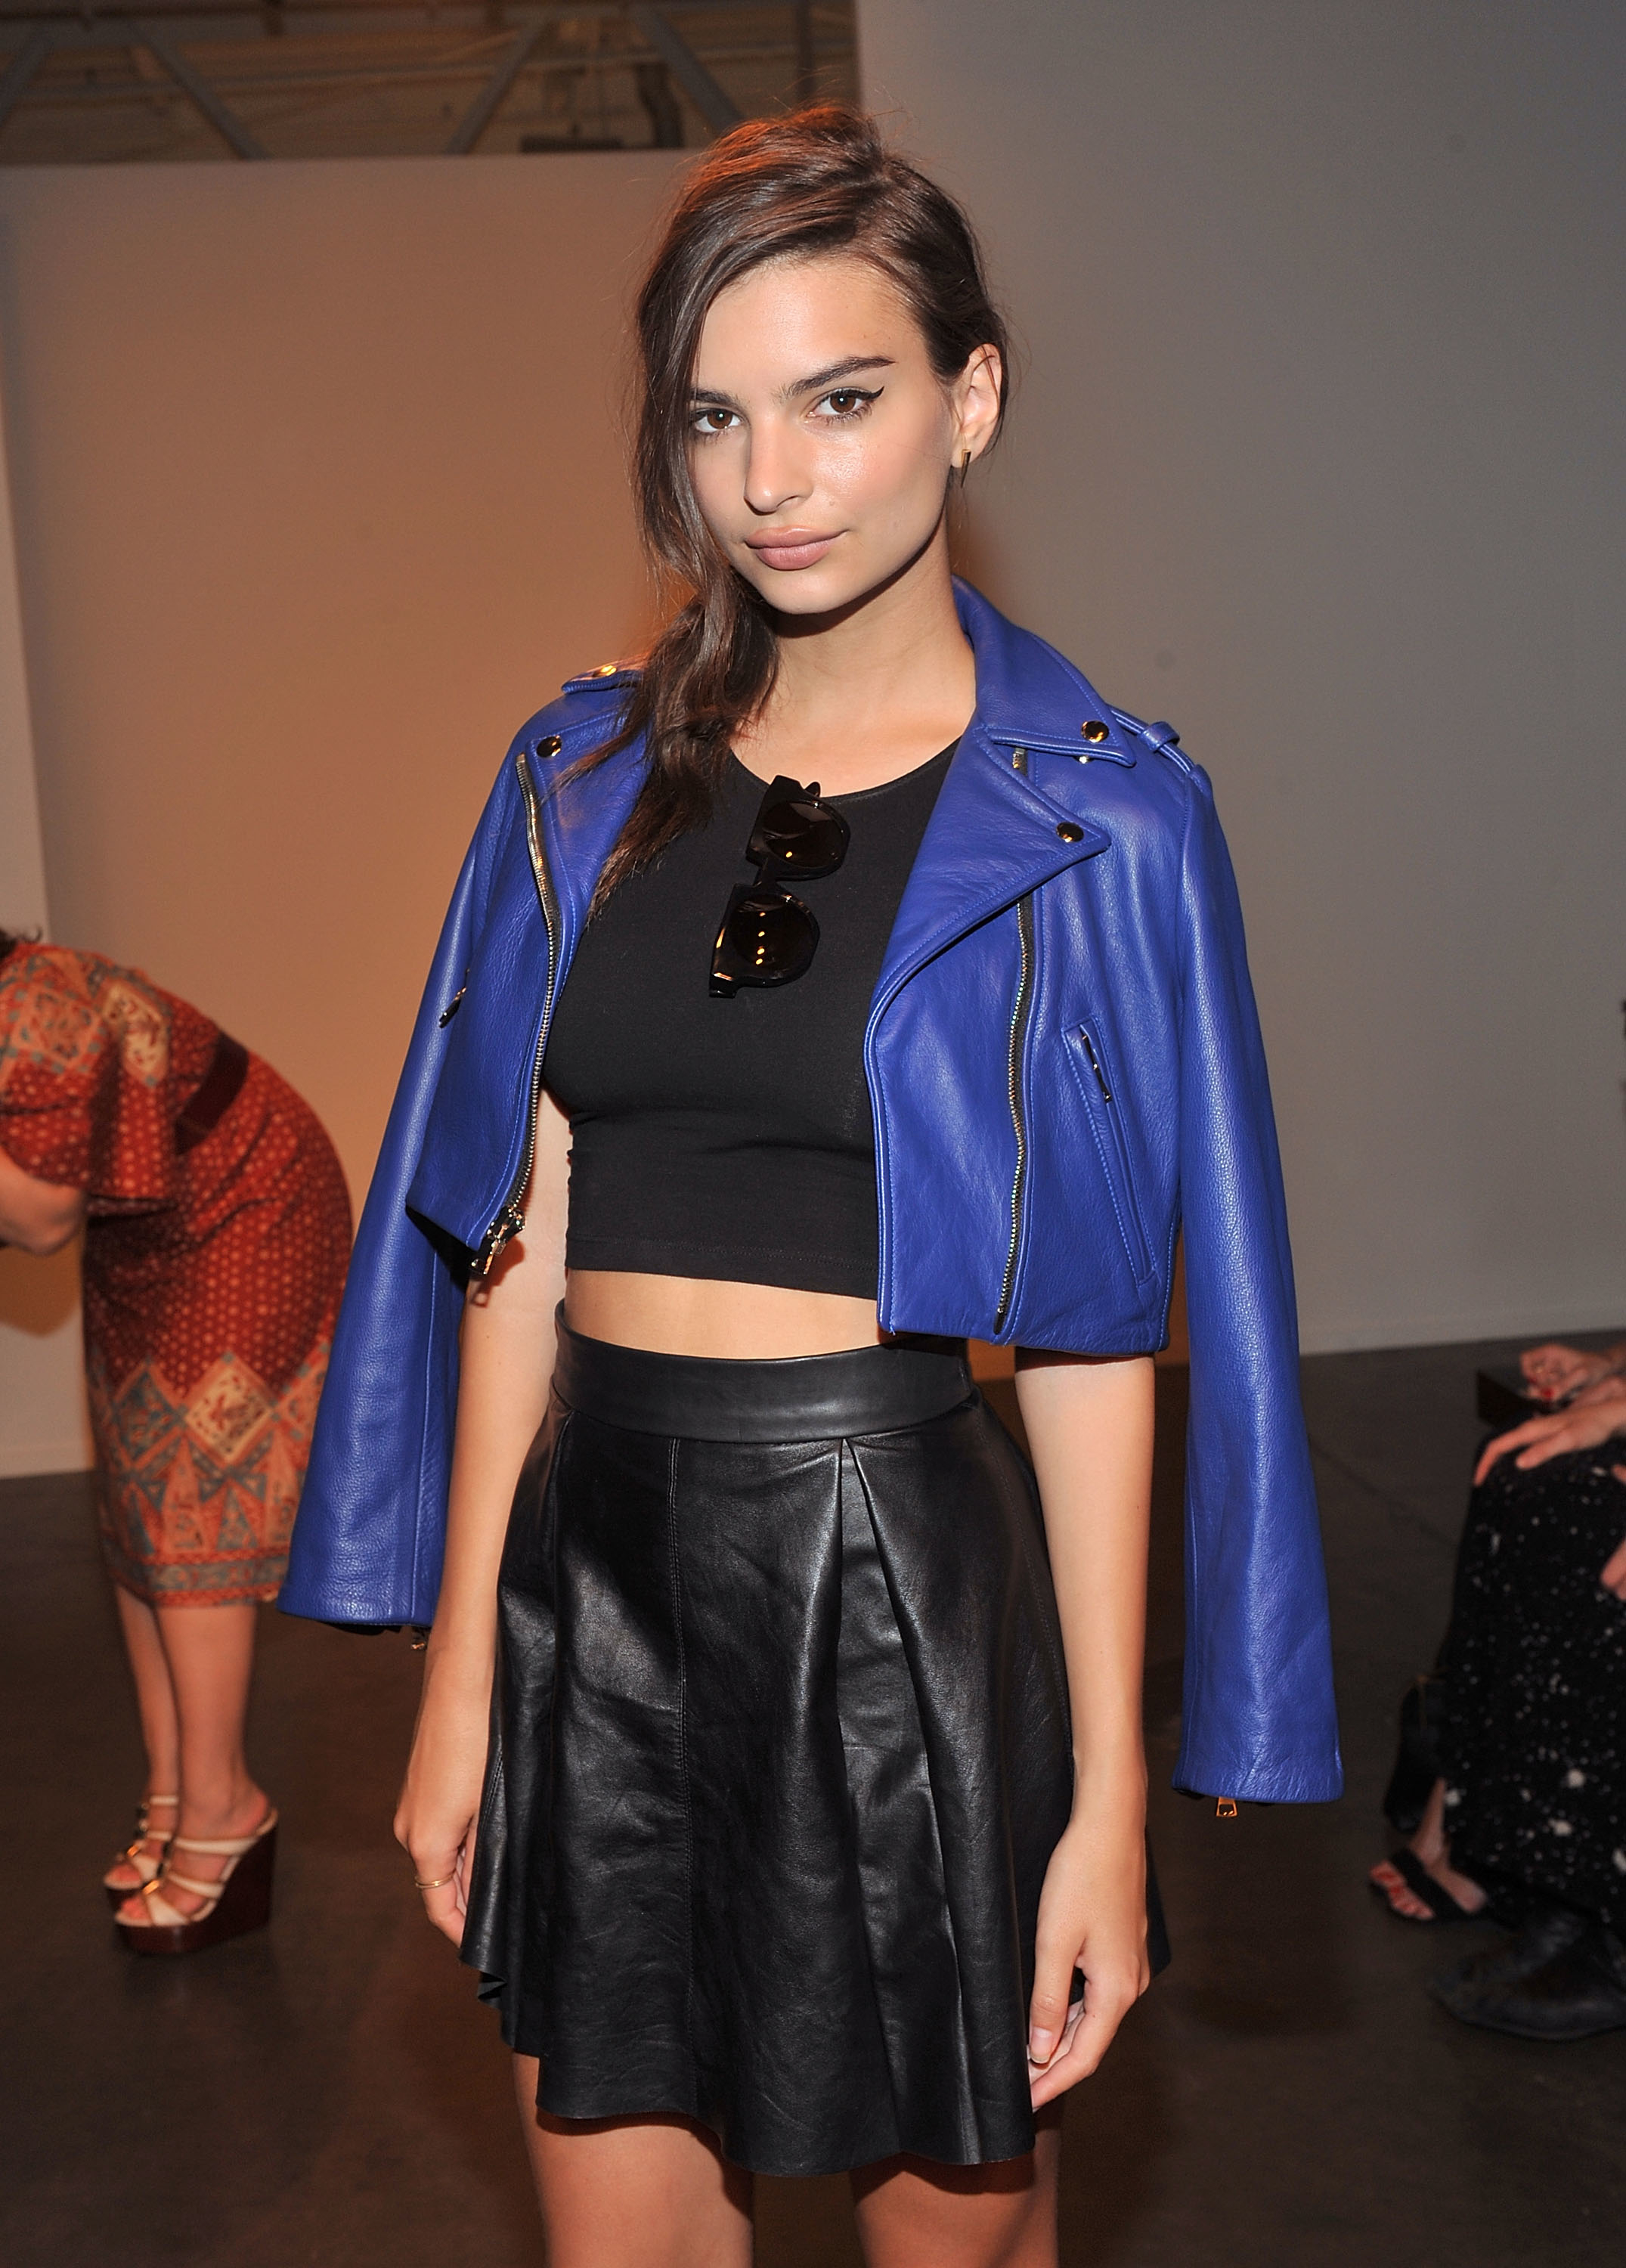 Close-up of Emily at a media event in a cropped jacket and top and miniskirt